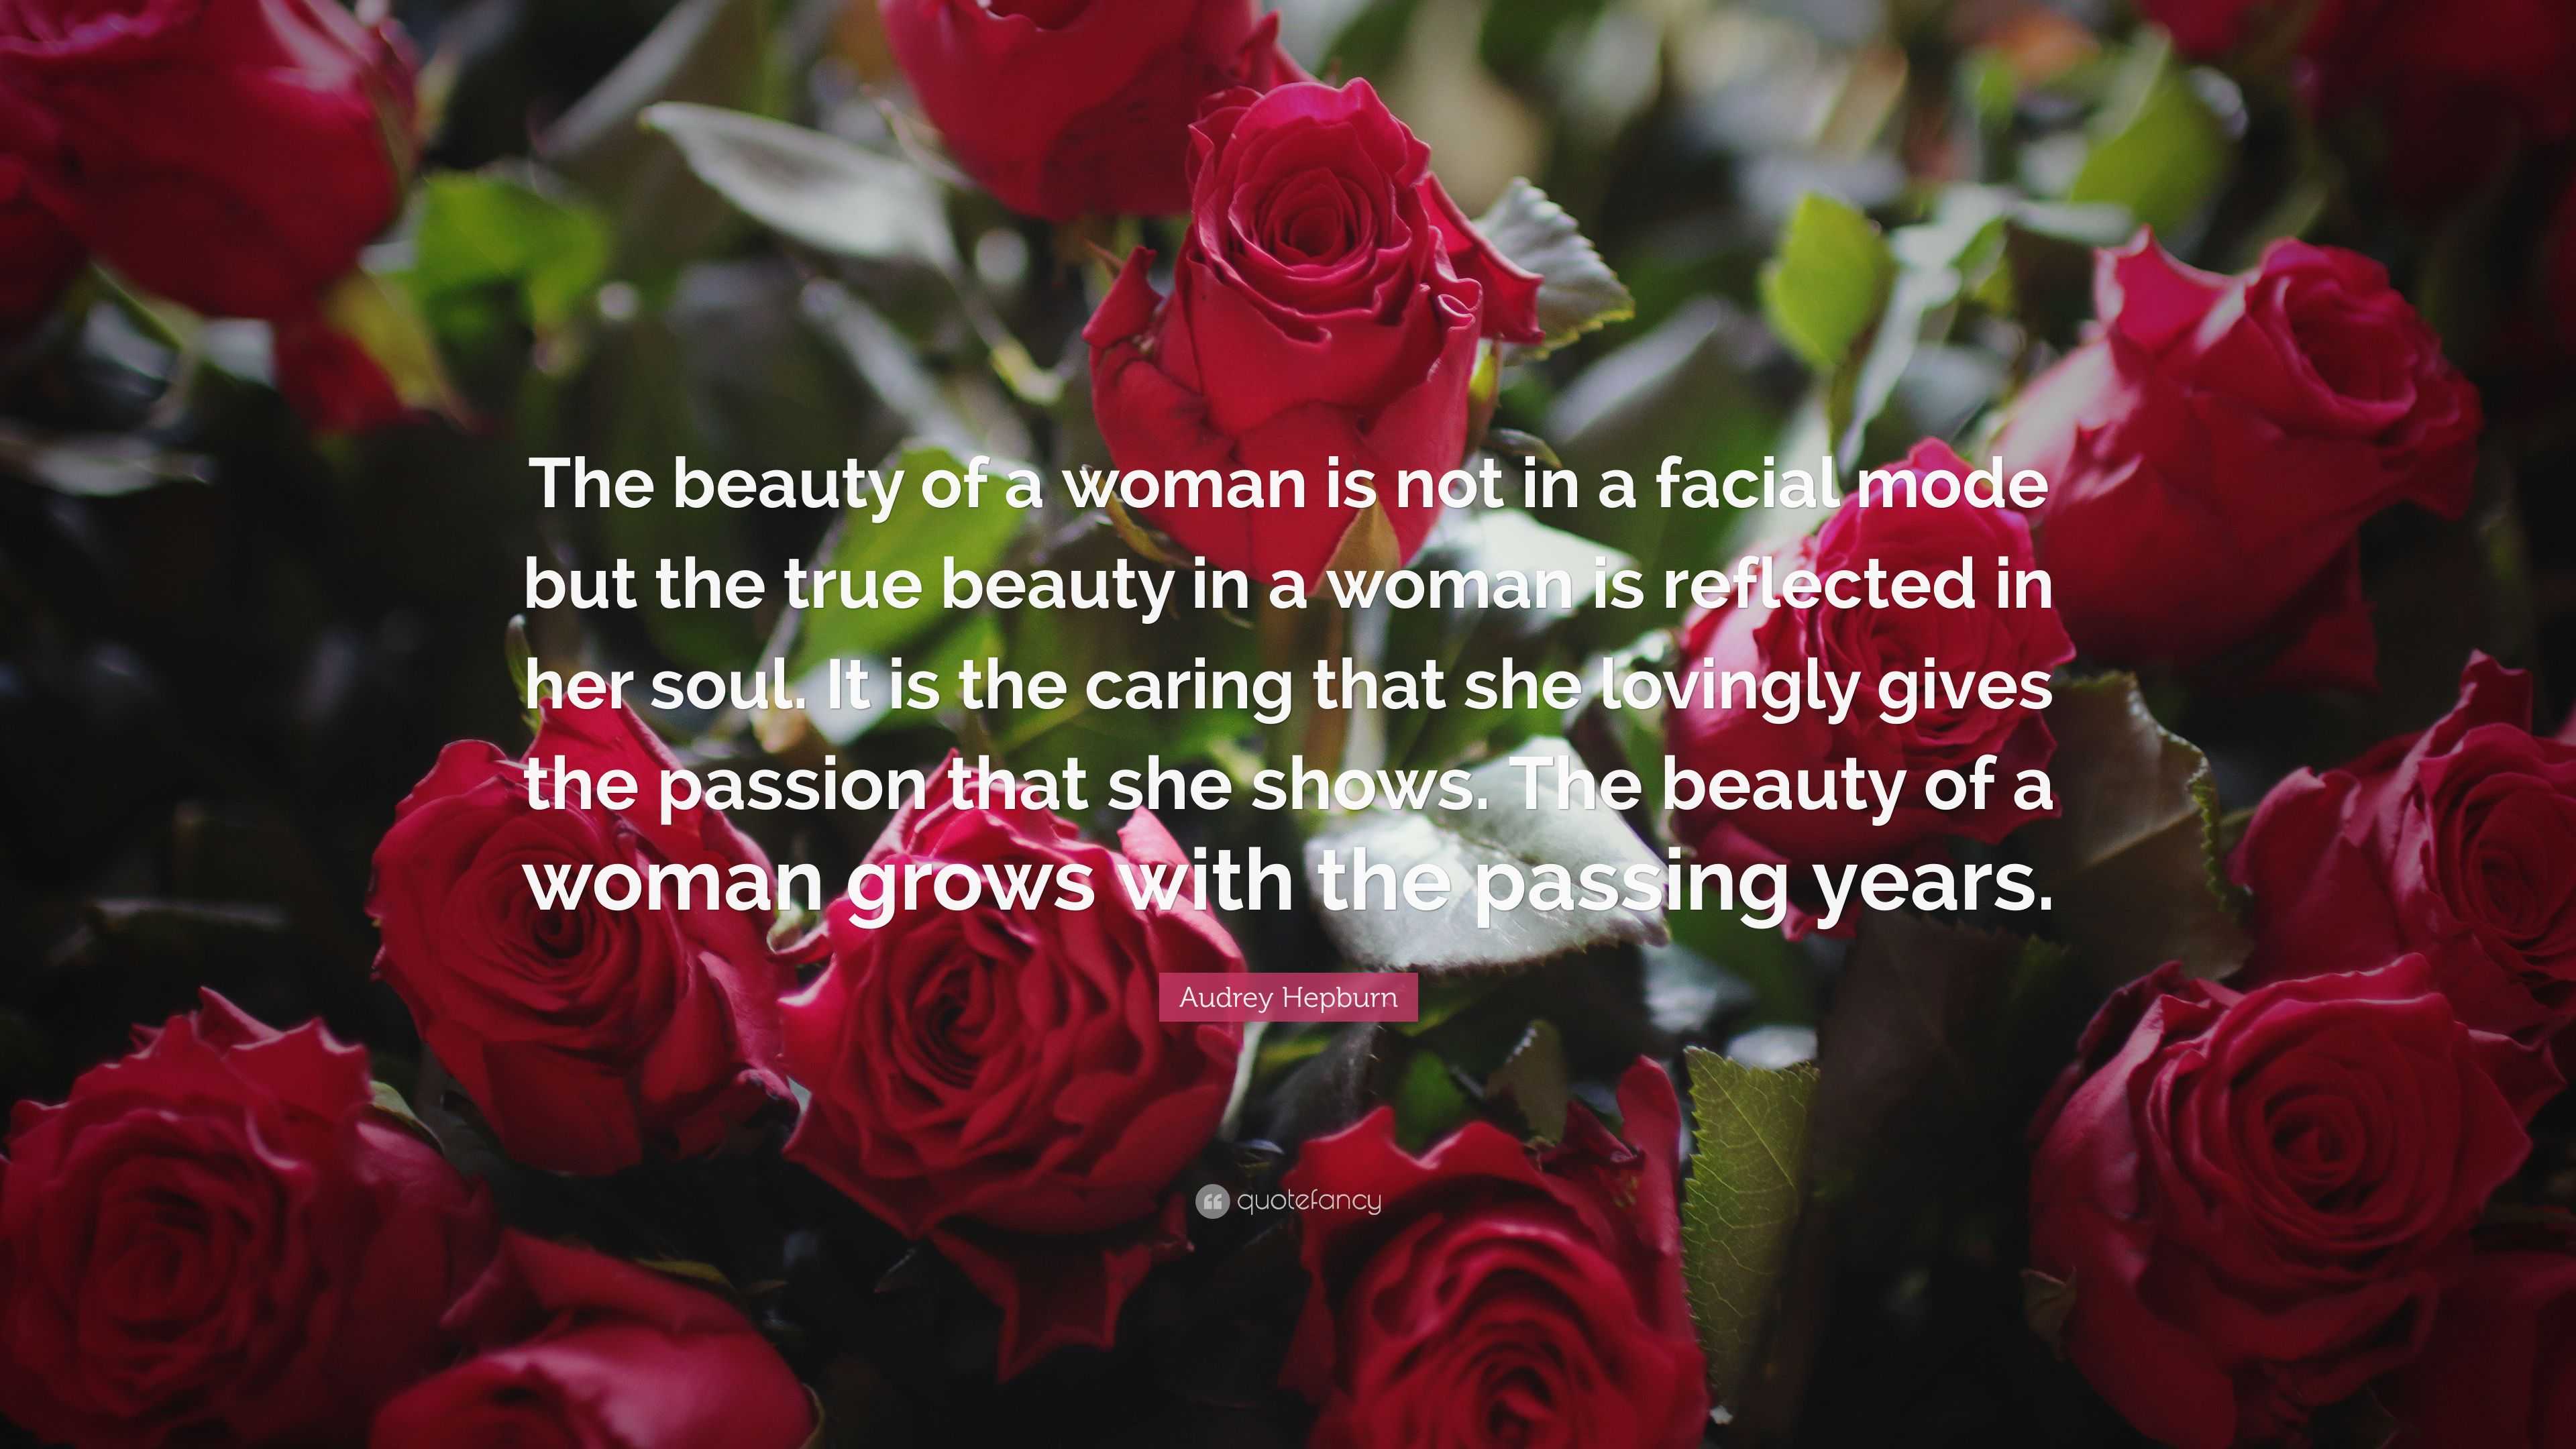 Audrey Hepburn Quote: “The beauty of a woman is not in a facial mode ...